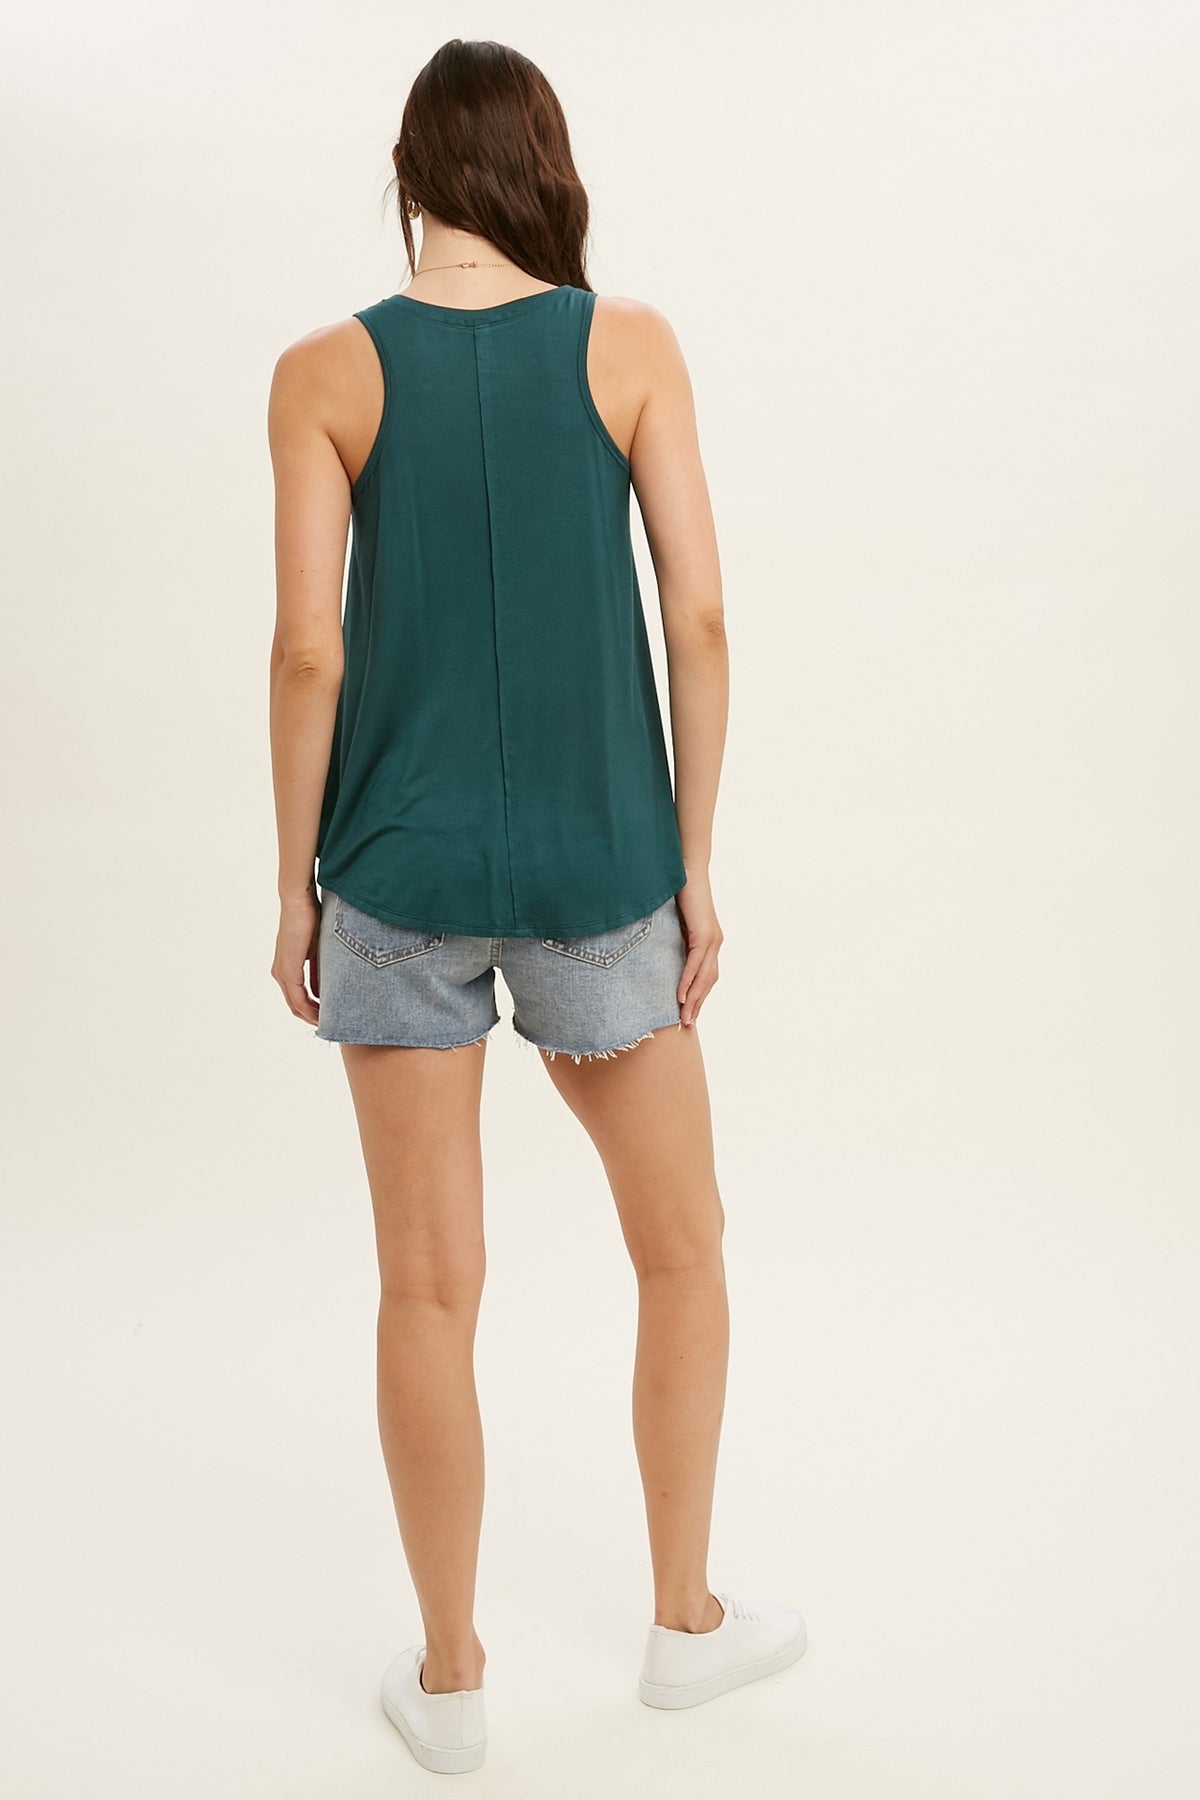 Easy Drapy Tank - Teal Green